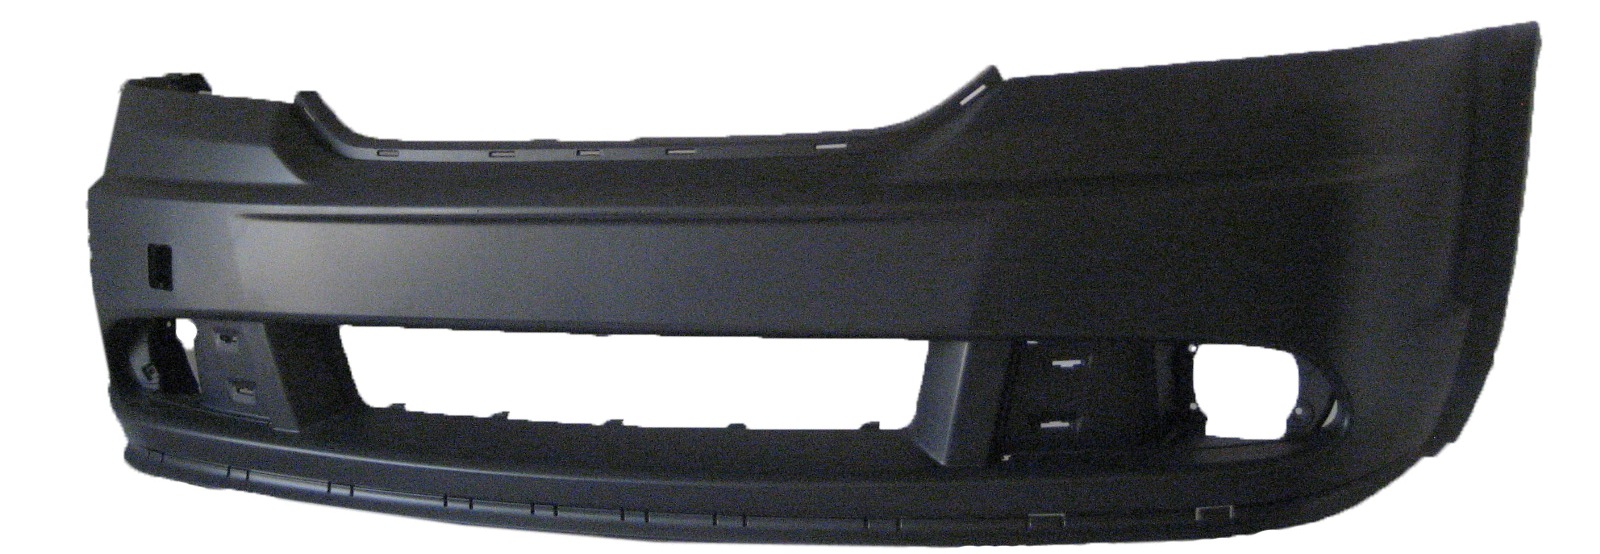 Aftermarket BUMPER COVERS for RAM - 1500, 1500,13-18,Front bumper cover